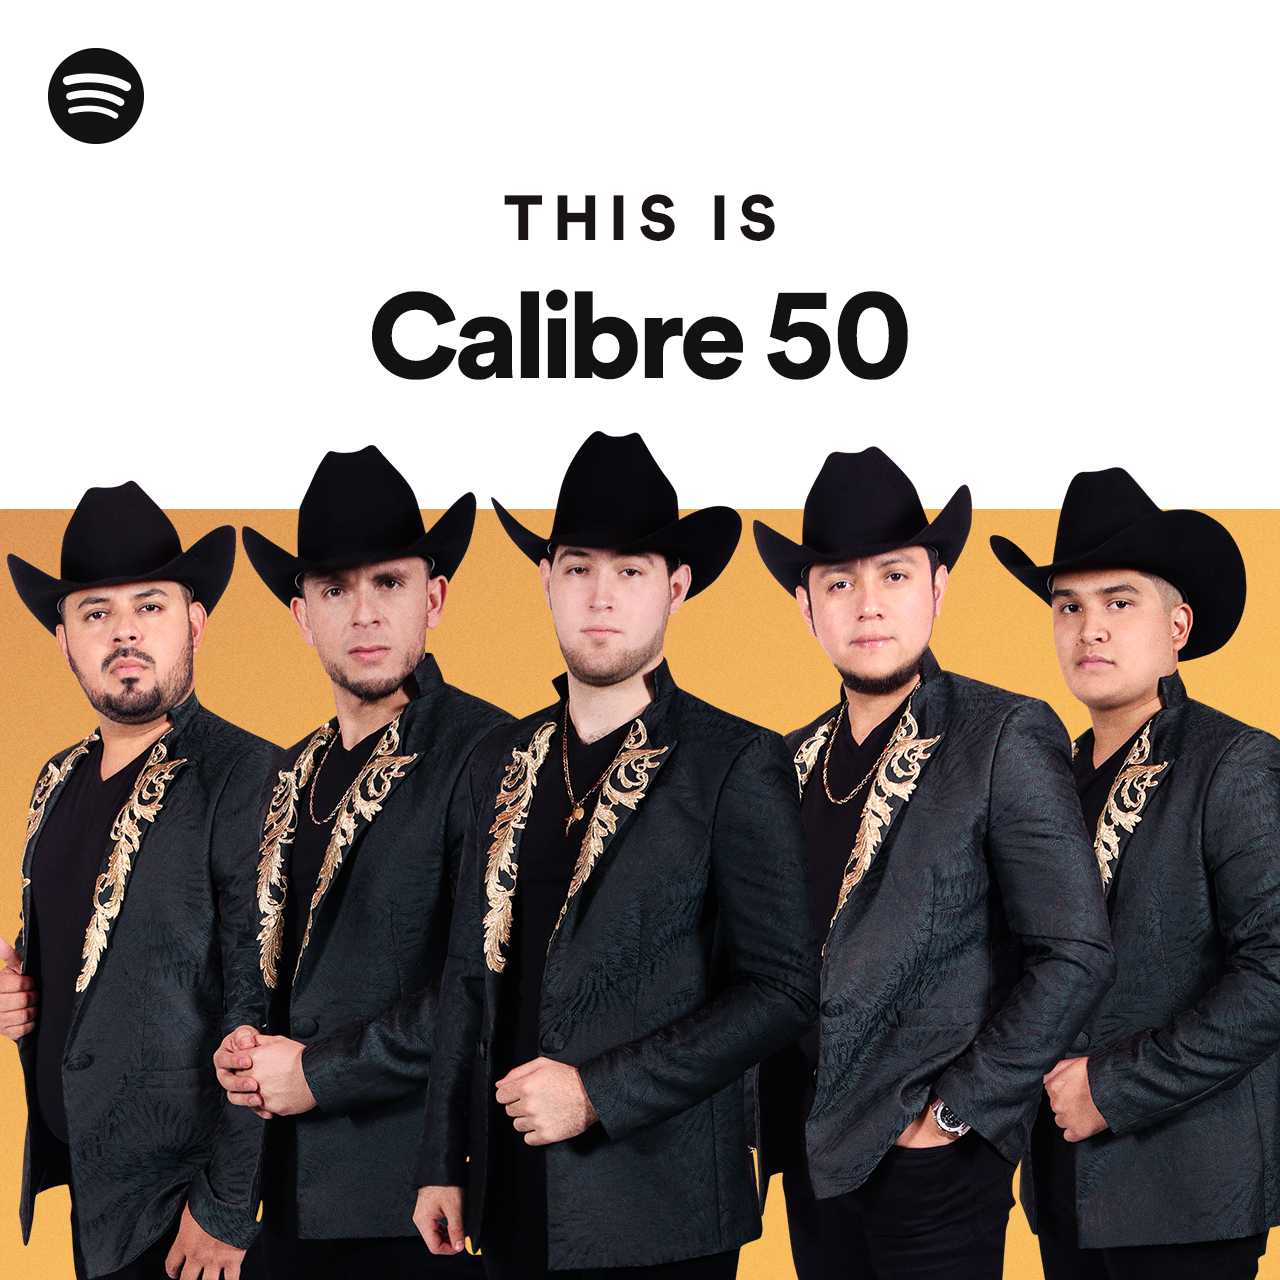 This Is Calibre 50 Spotify Playlist